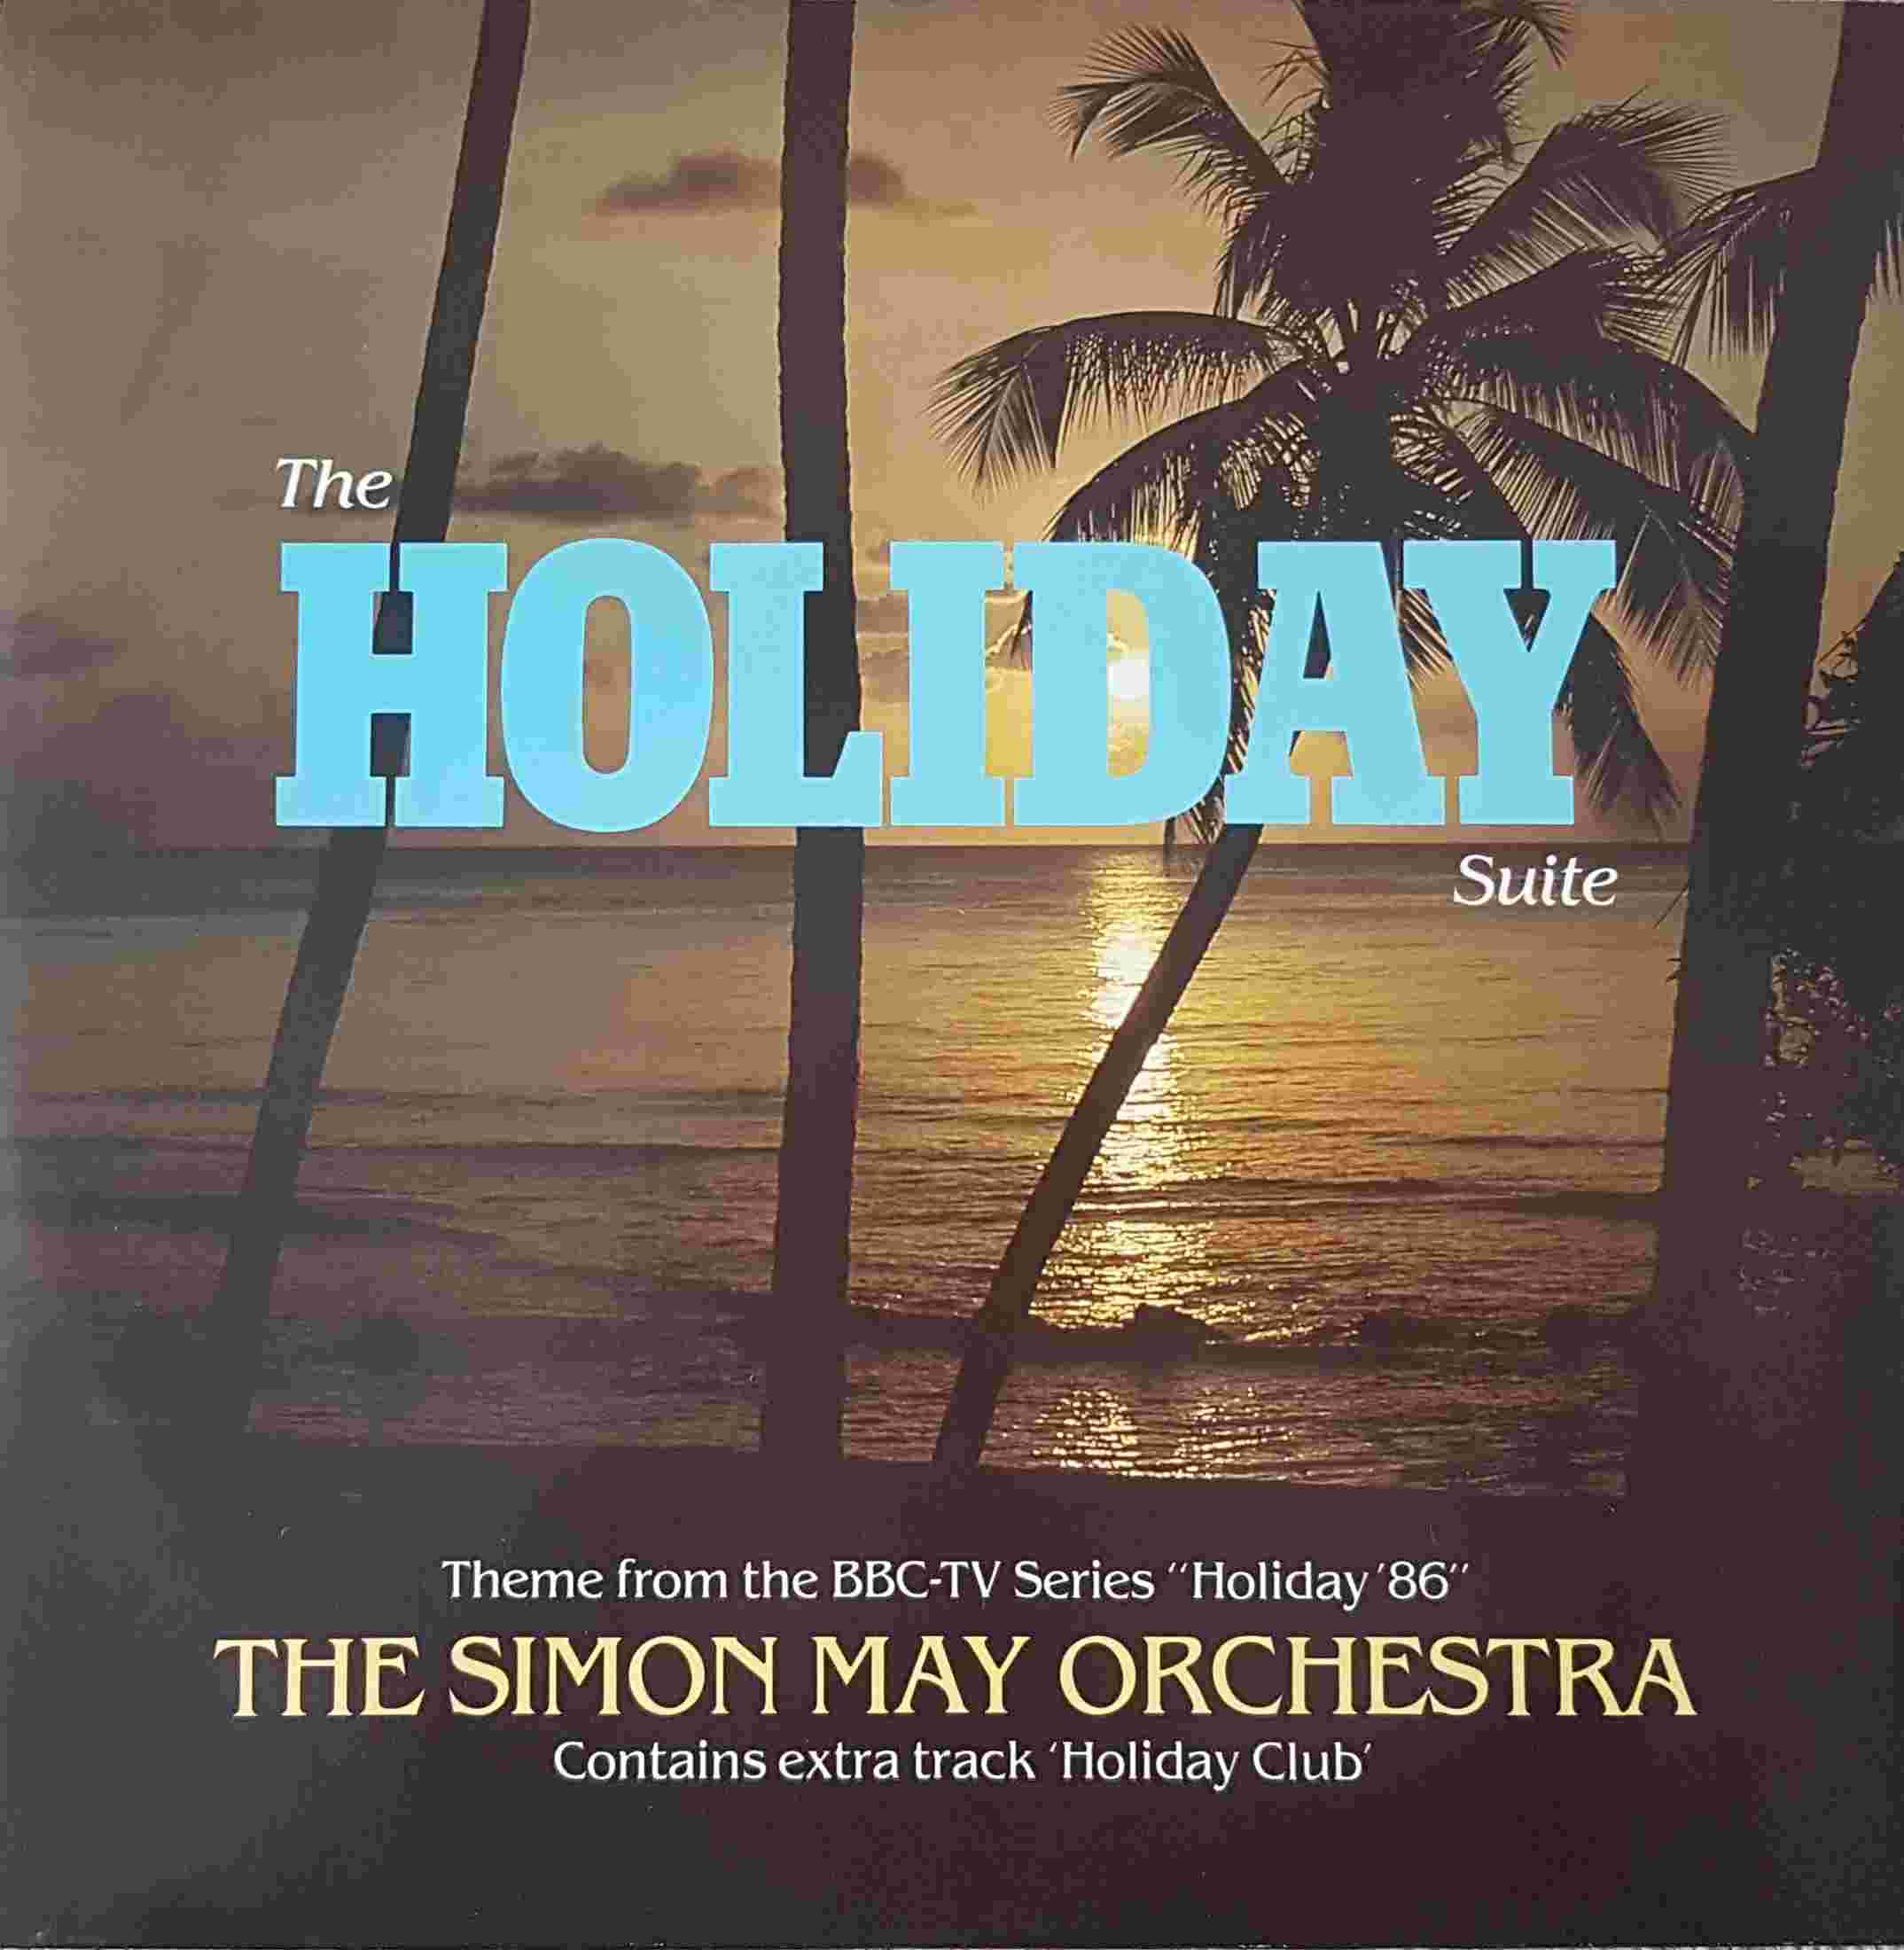 Picture of The holiday suite (Holiday '86) by artist The Simon May orchestra from the BBC 12inches - Records and Tapes library